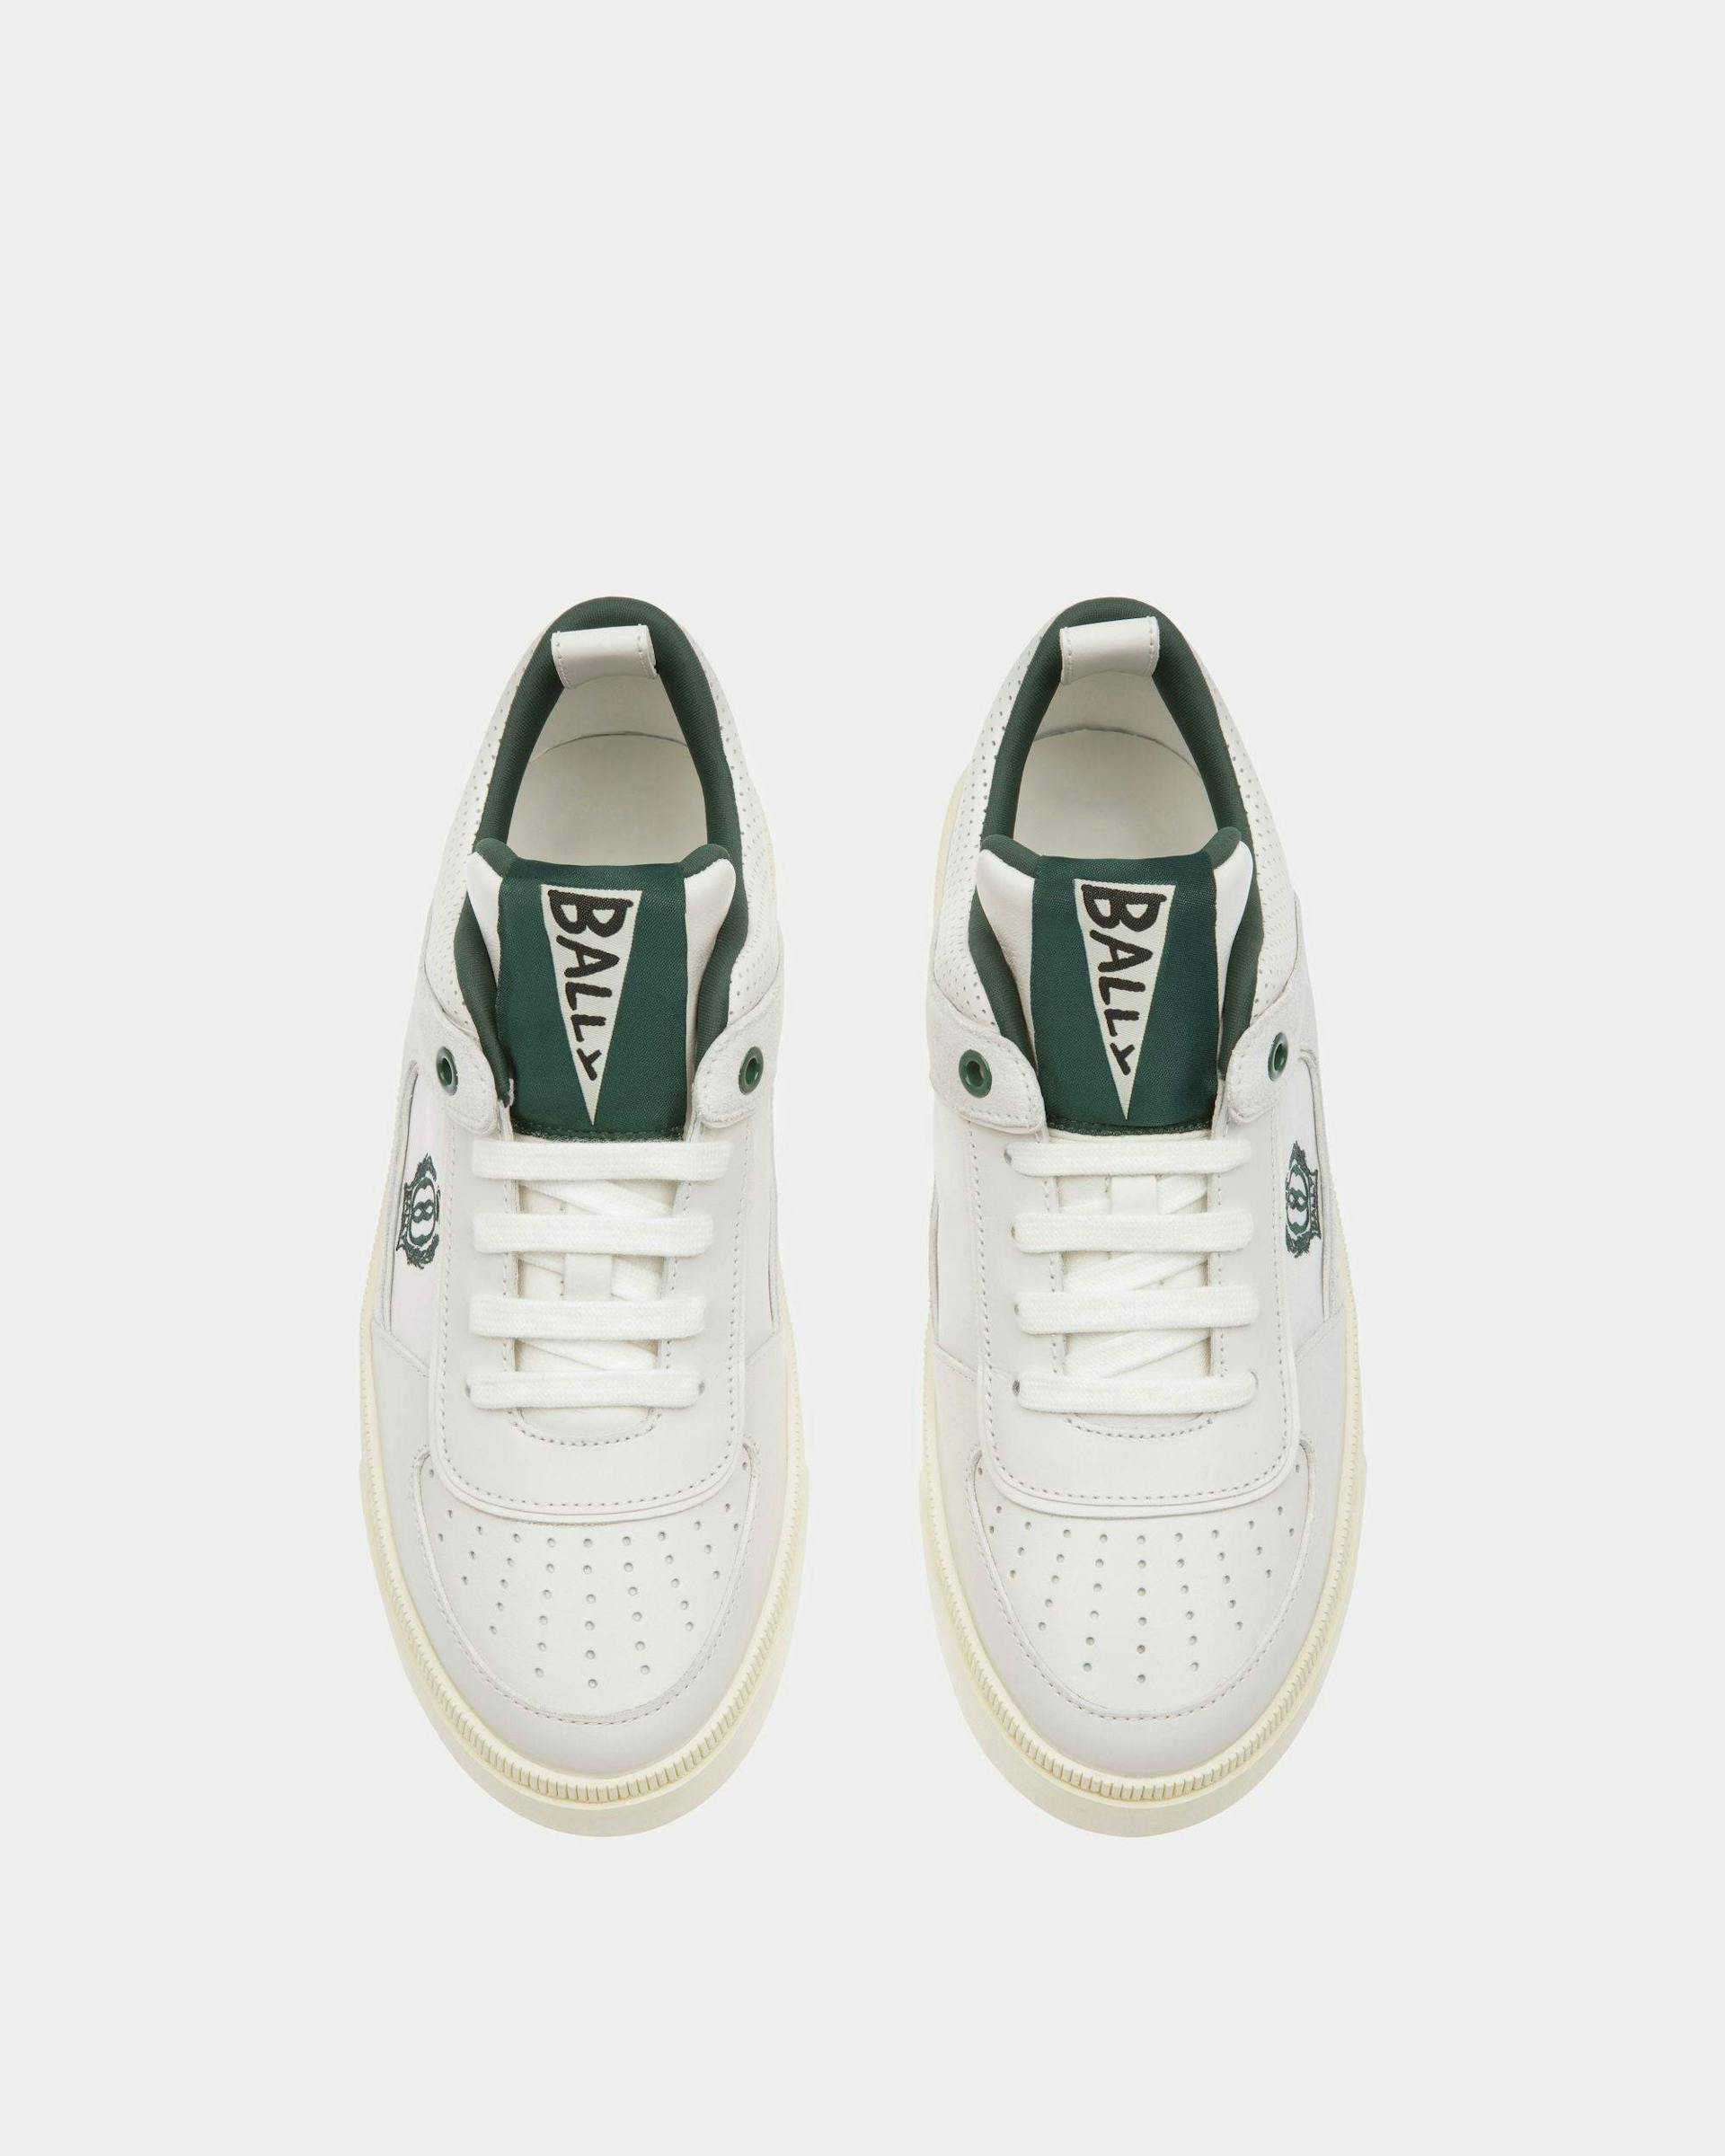 Women's Raise Sneakers In White And Green Leather | Bally | Still Life 3/4 Front